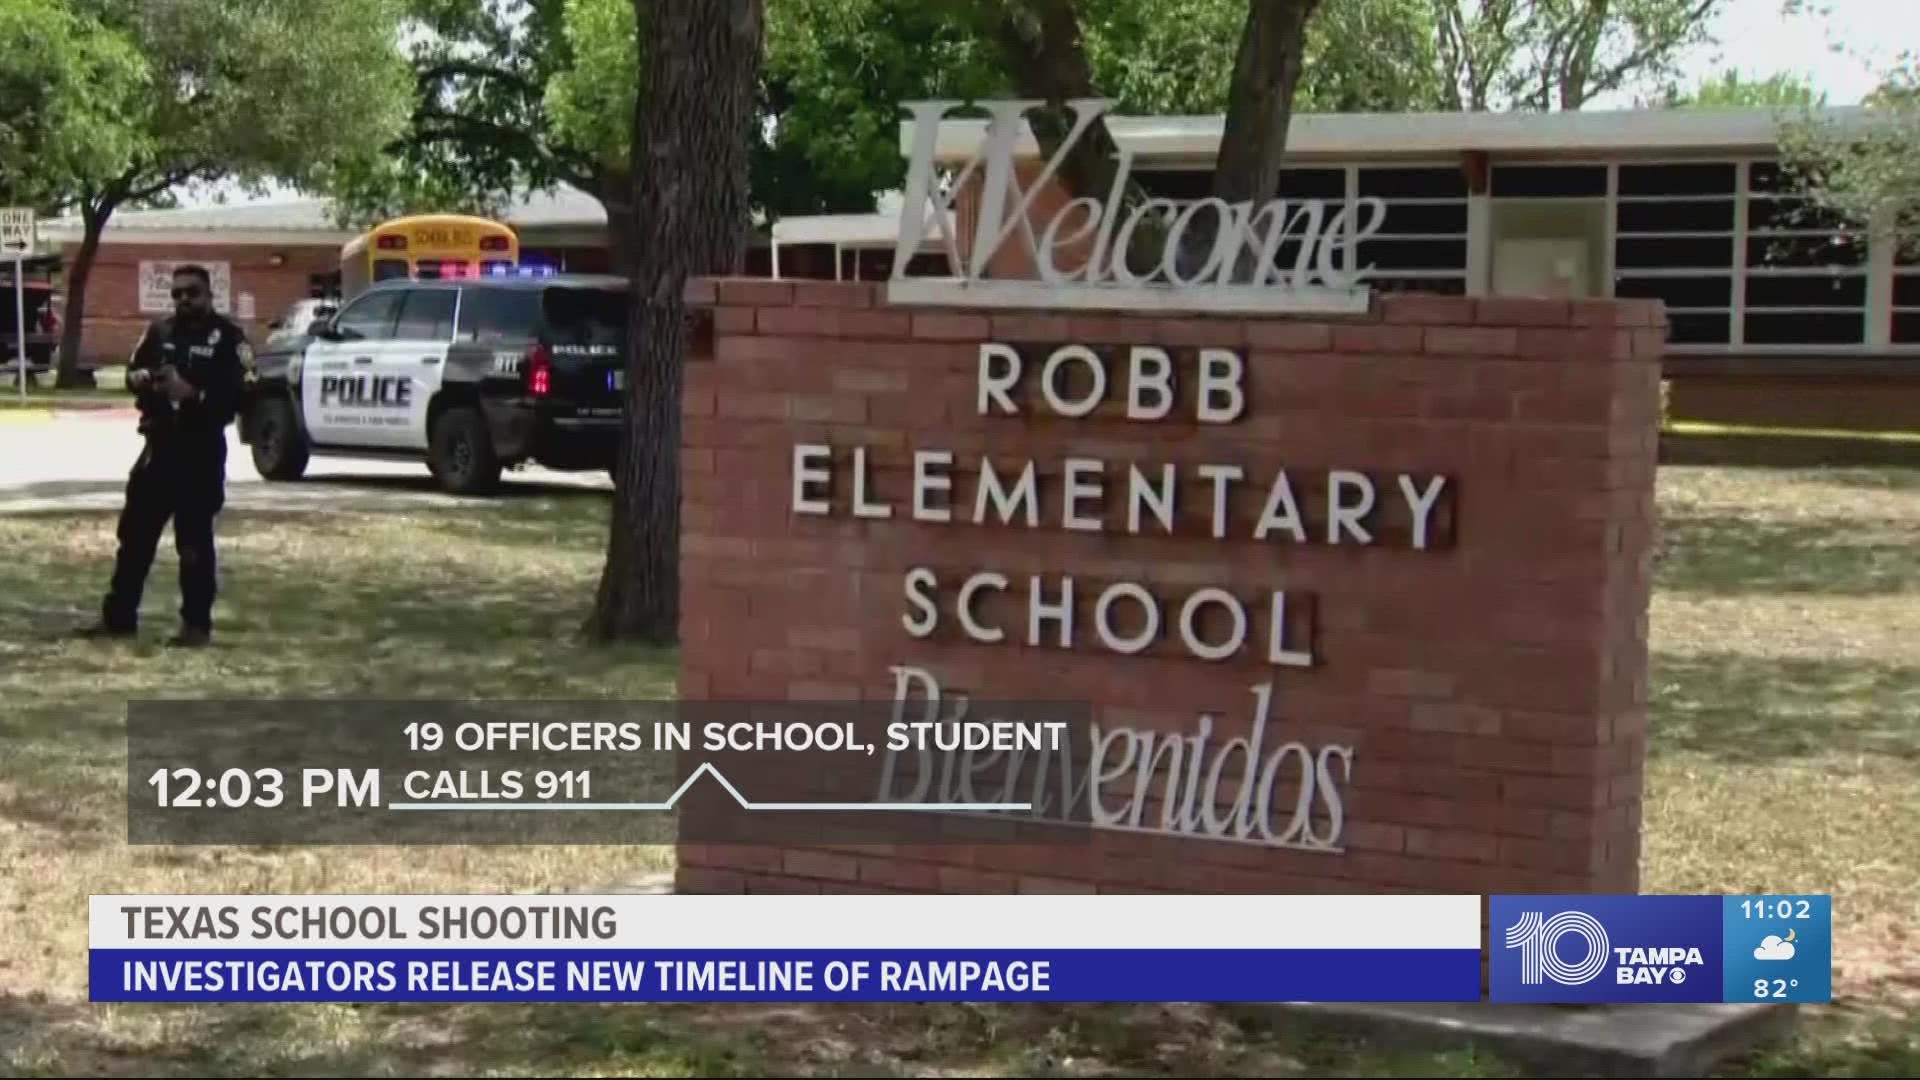 He suggested he wasn't given the full picture about the initial timeline of law enforcement's response to Robb Elementary School.